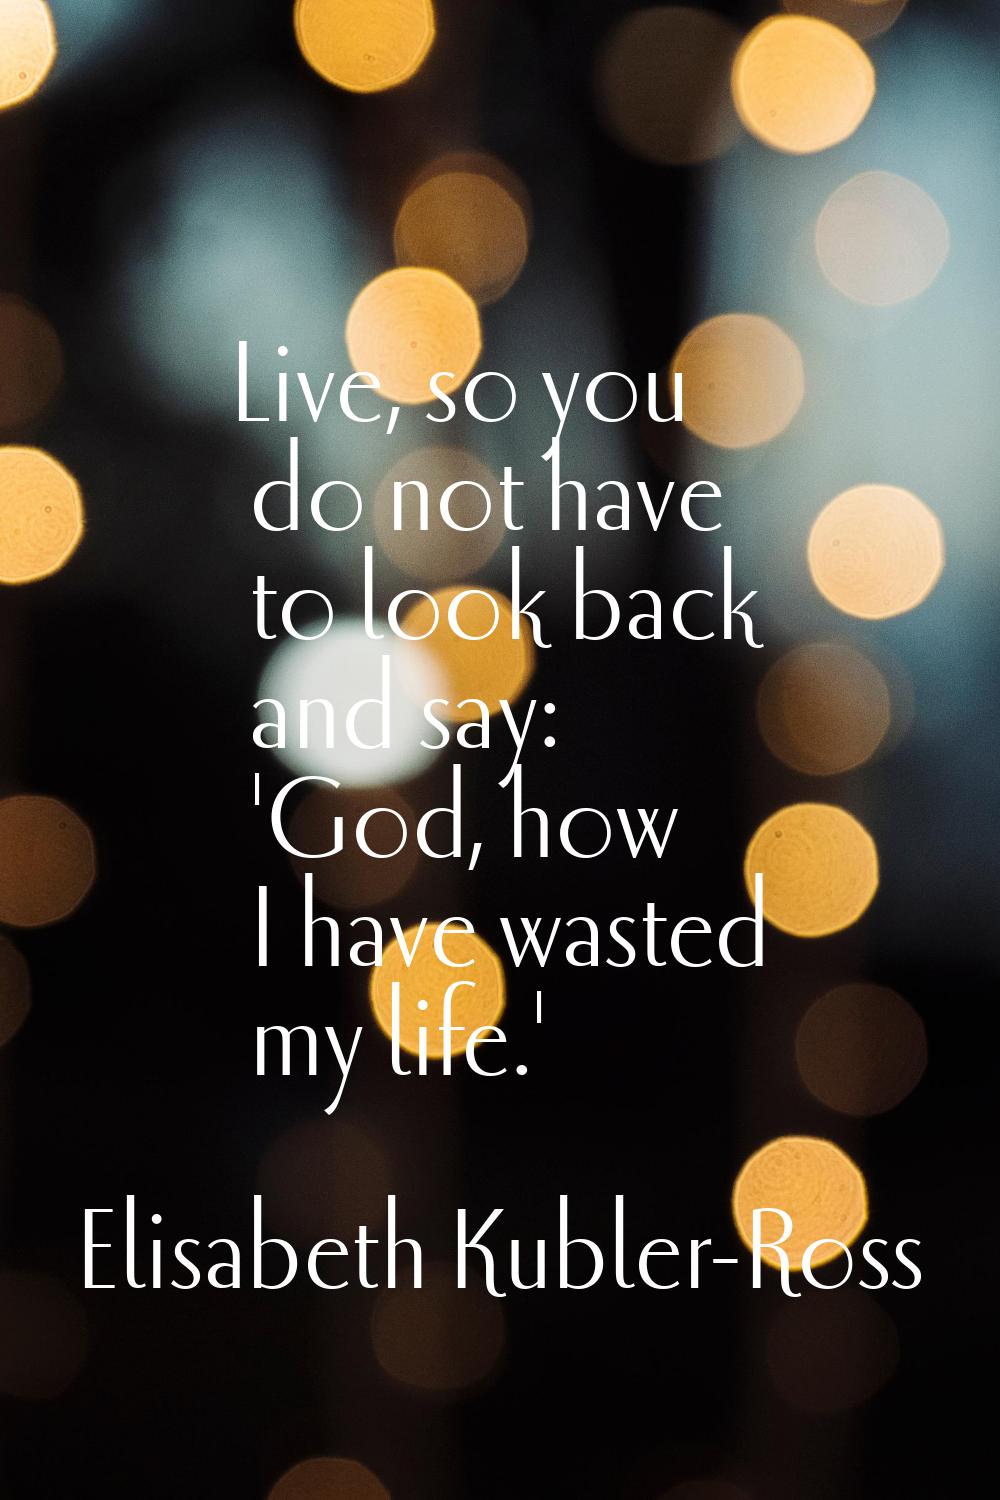 Live, so you do not have to look back and say: 'God, how I have wasted my life.'